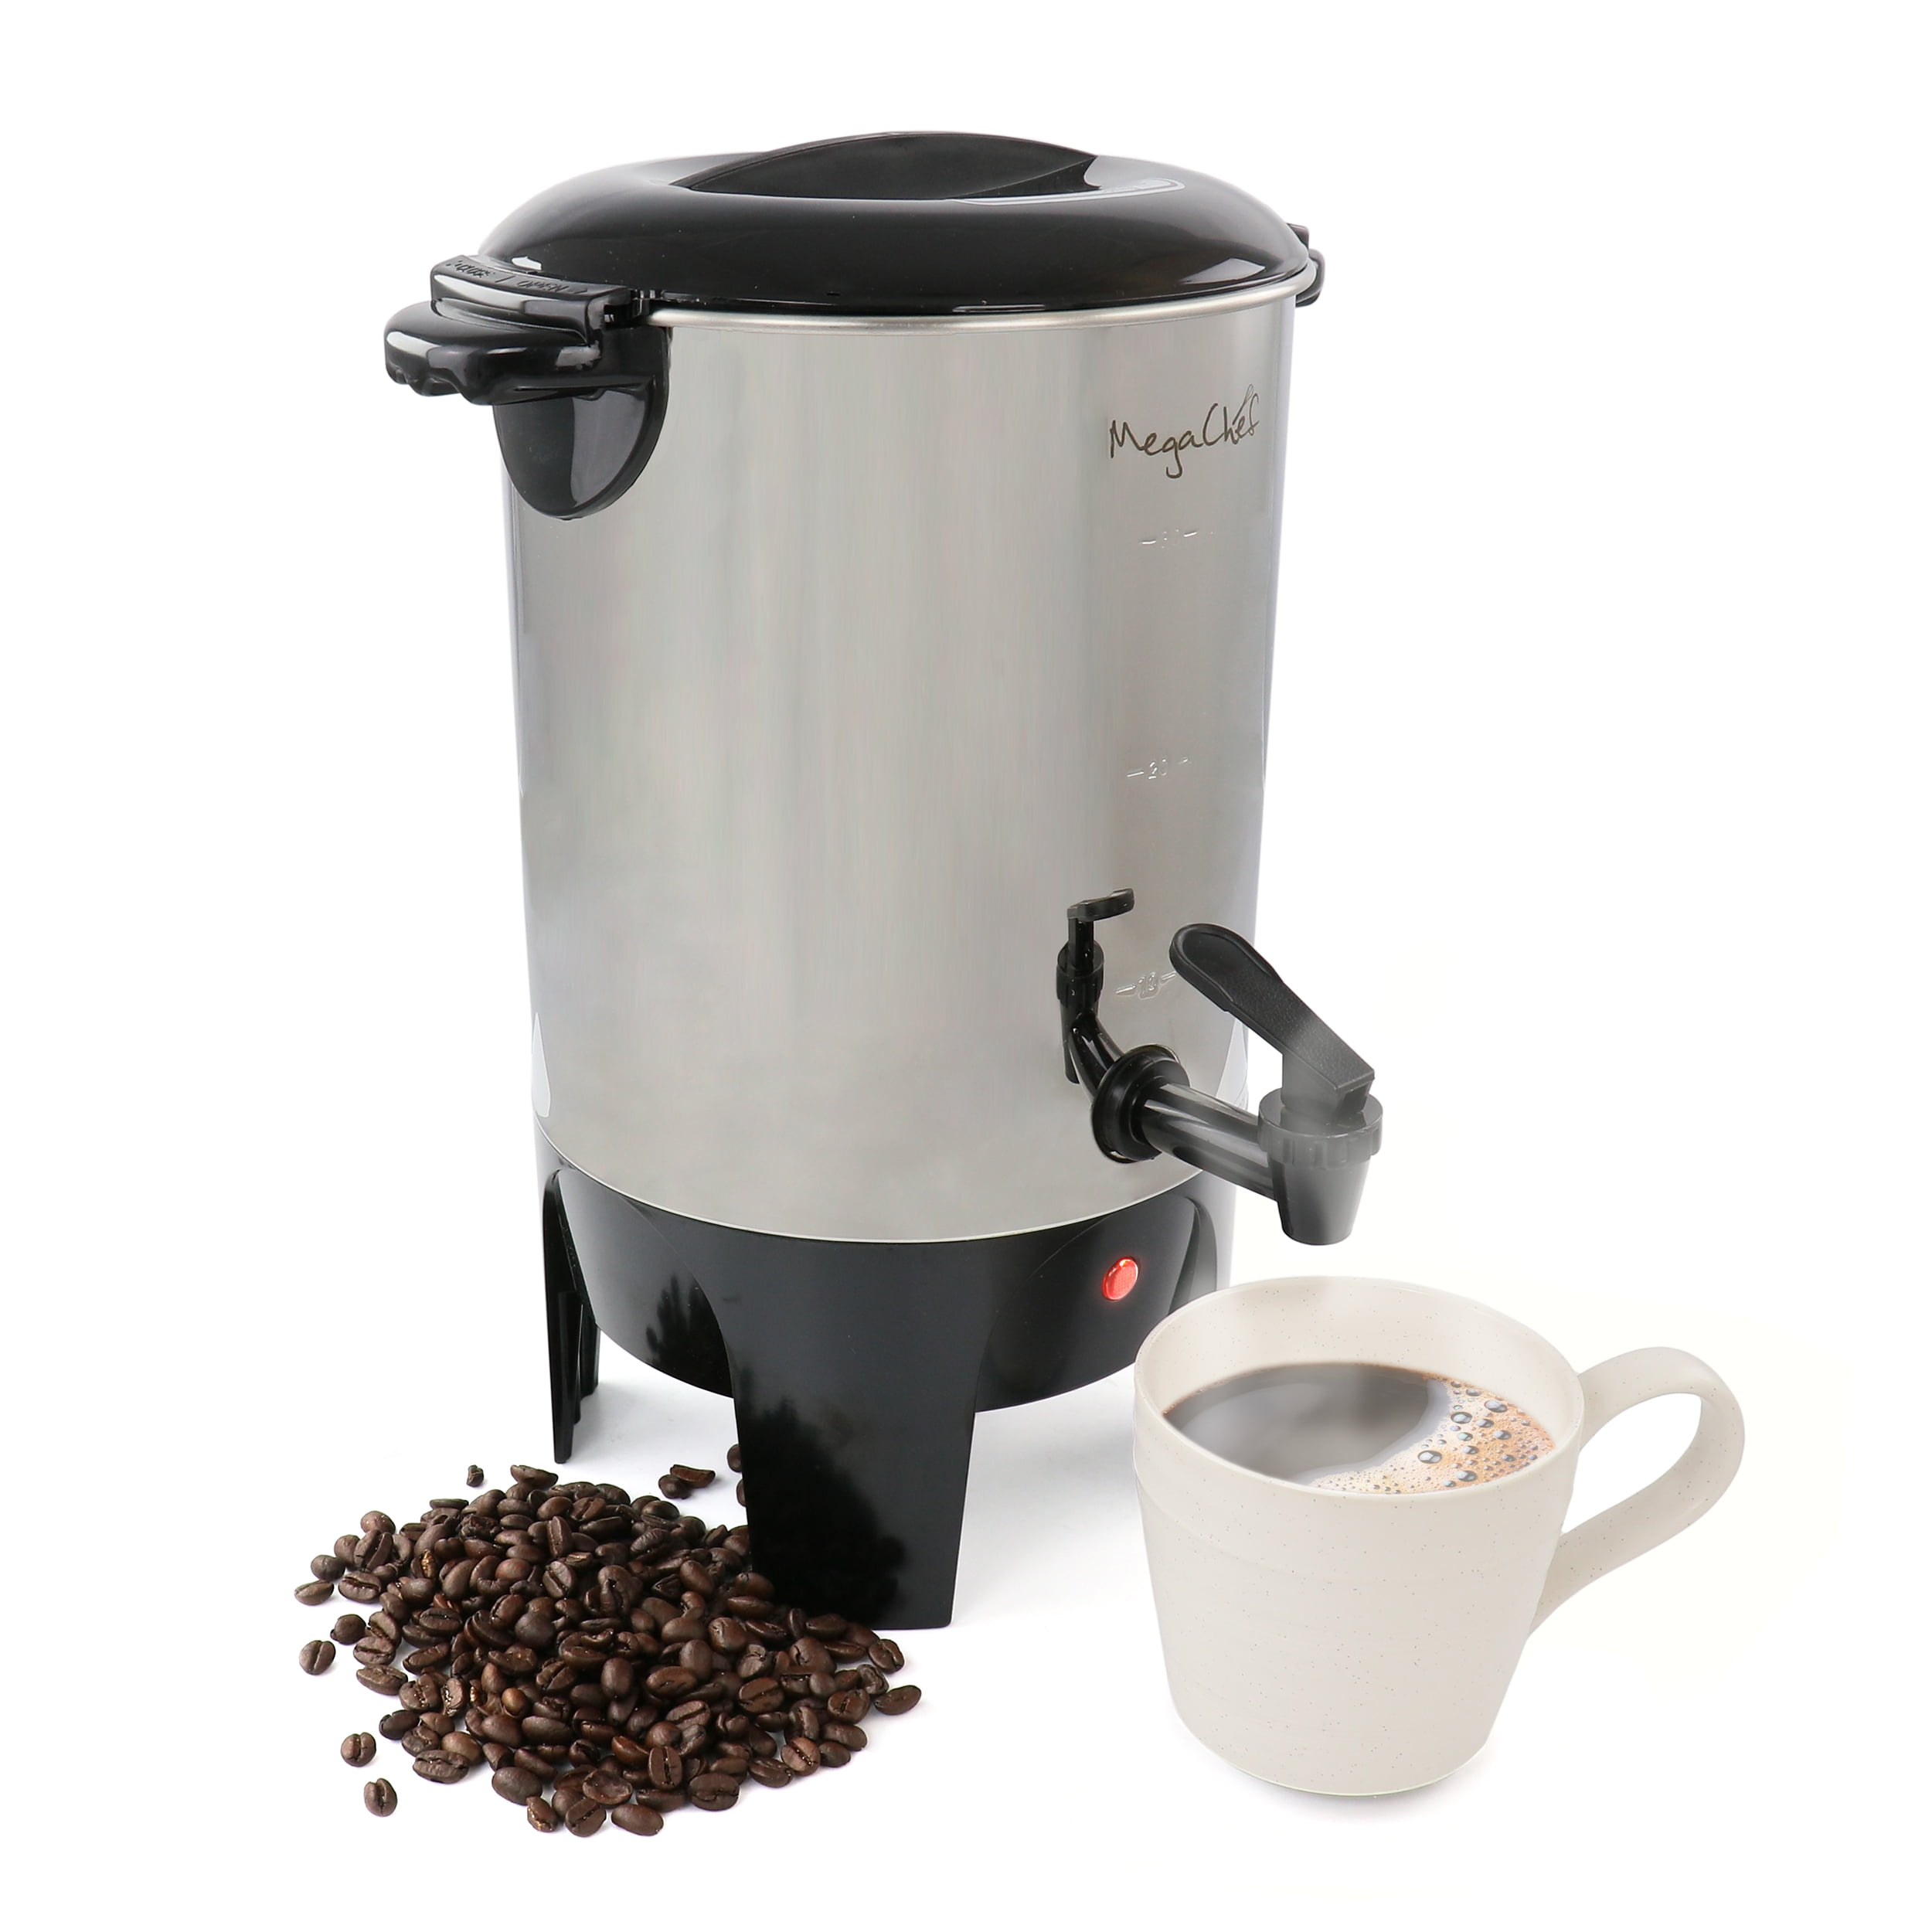 BAKERS CHEFS 60-CUP COFFEE MAKER URN STAINLESS STEEL